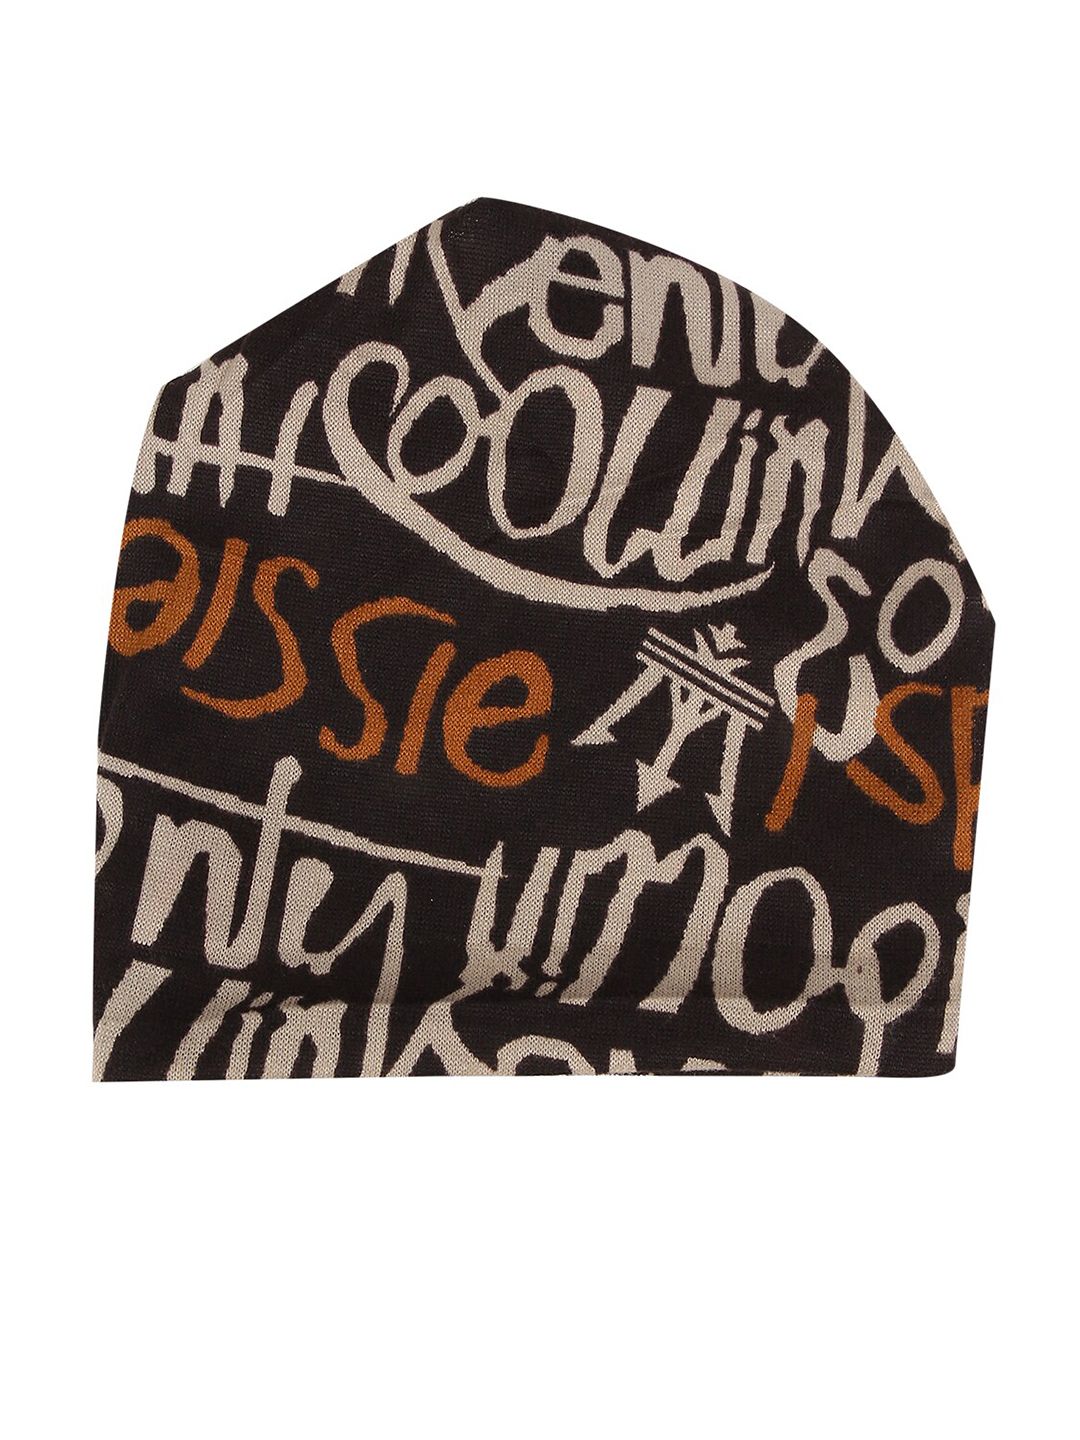 iSWEVEN Unisex White & Yellow Printed Beanie Price in India